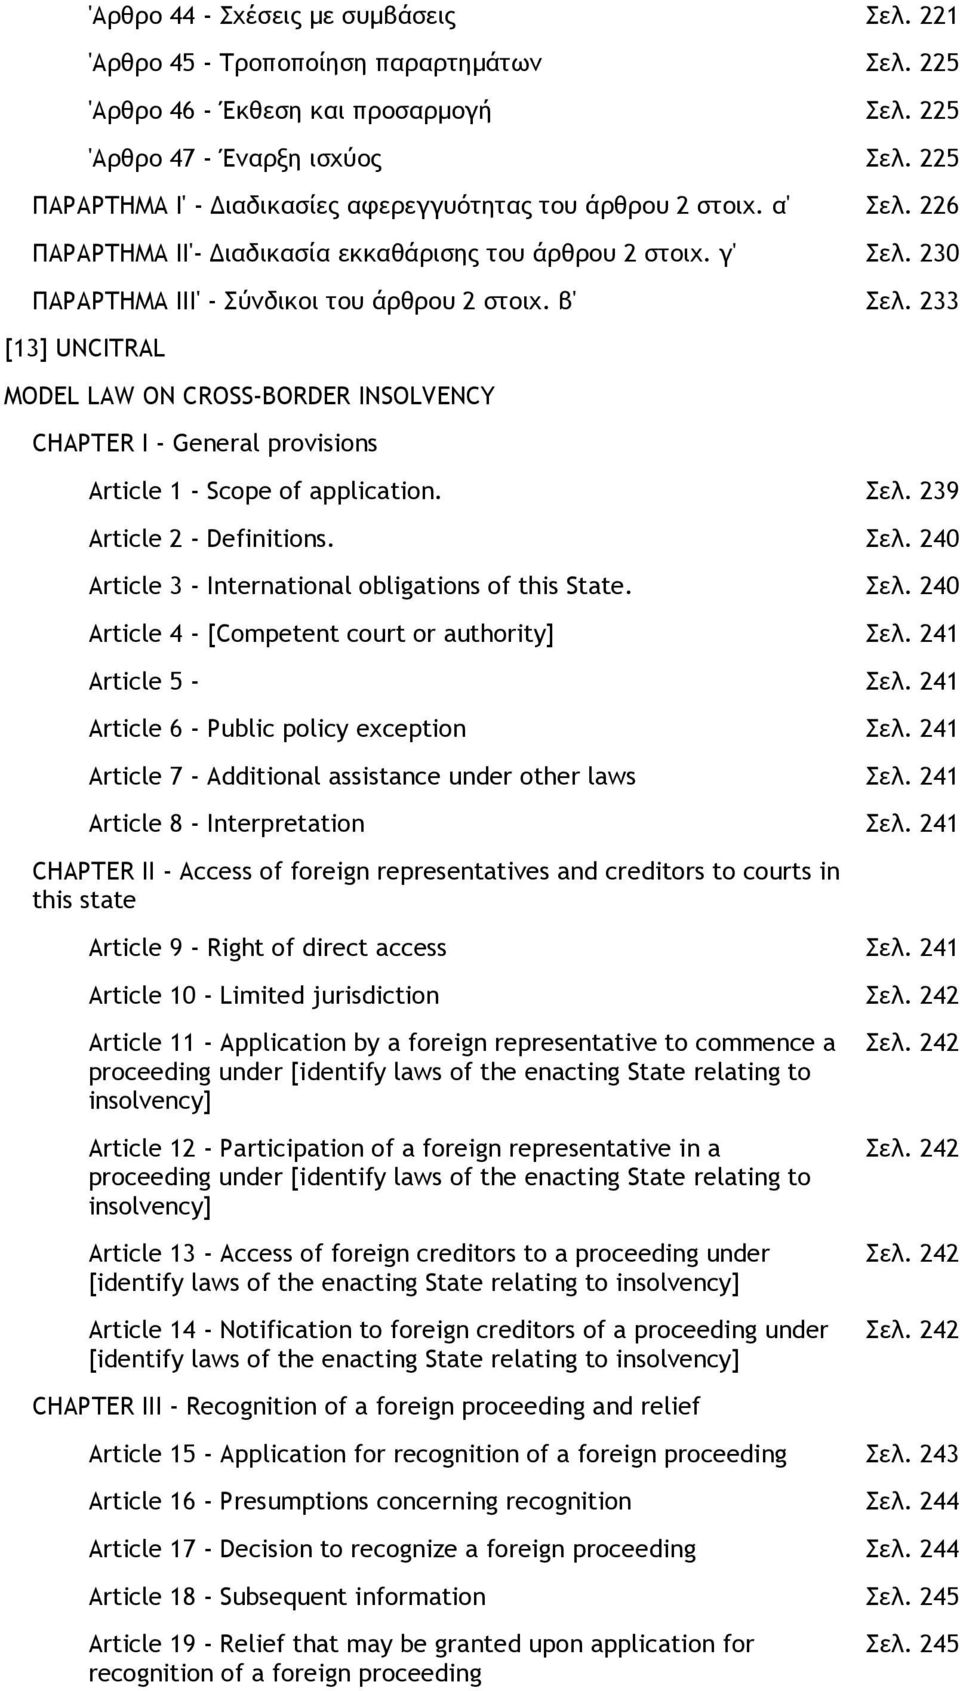 233 [13] UNCITRAL MODEL LAW ON CROSS-BORDER INSOLVENCY CHAPTER I - General provisions Article 1 - Scope of application. Σελ. 239 Article 2 - Definitions. Σελ. 240 Article 3 - International obligations of this State.